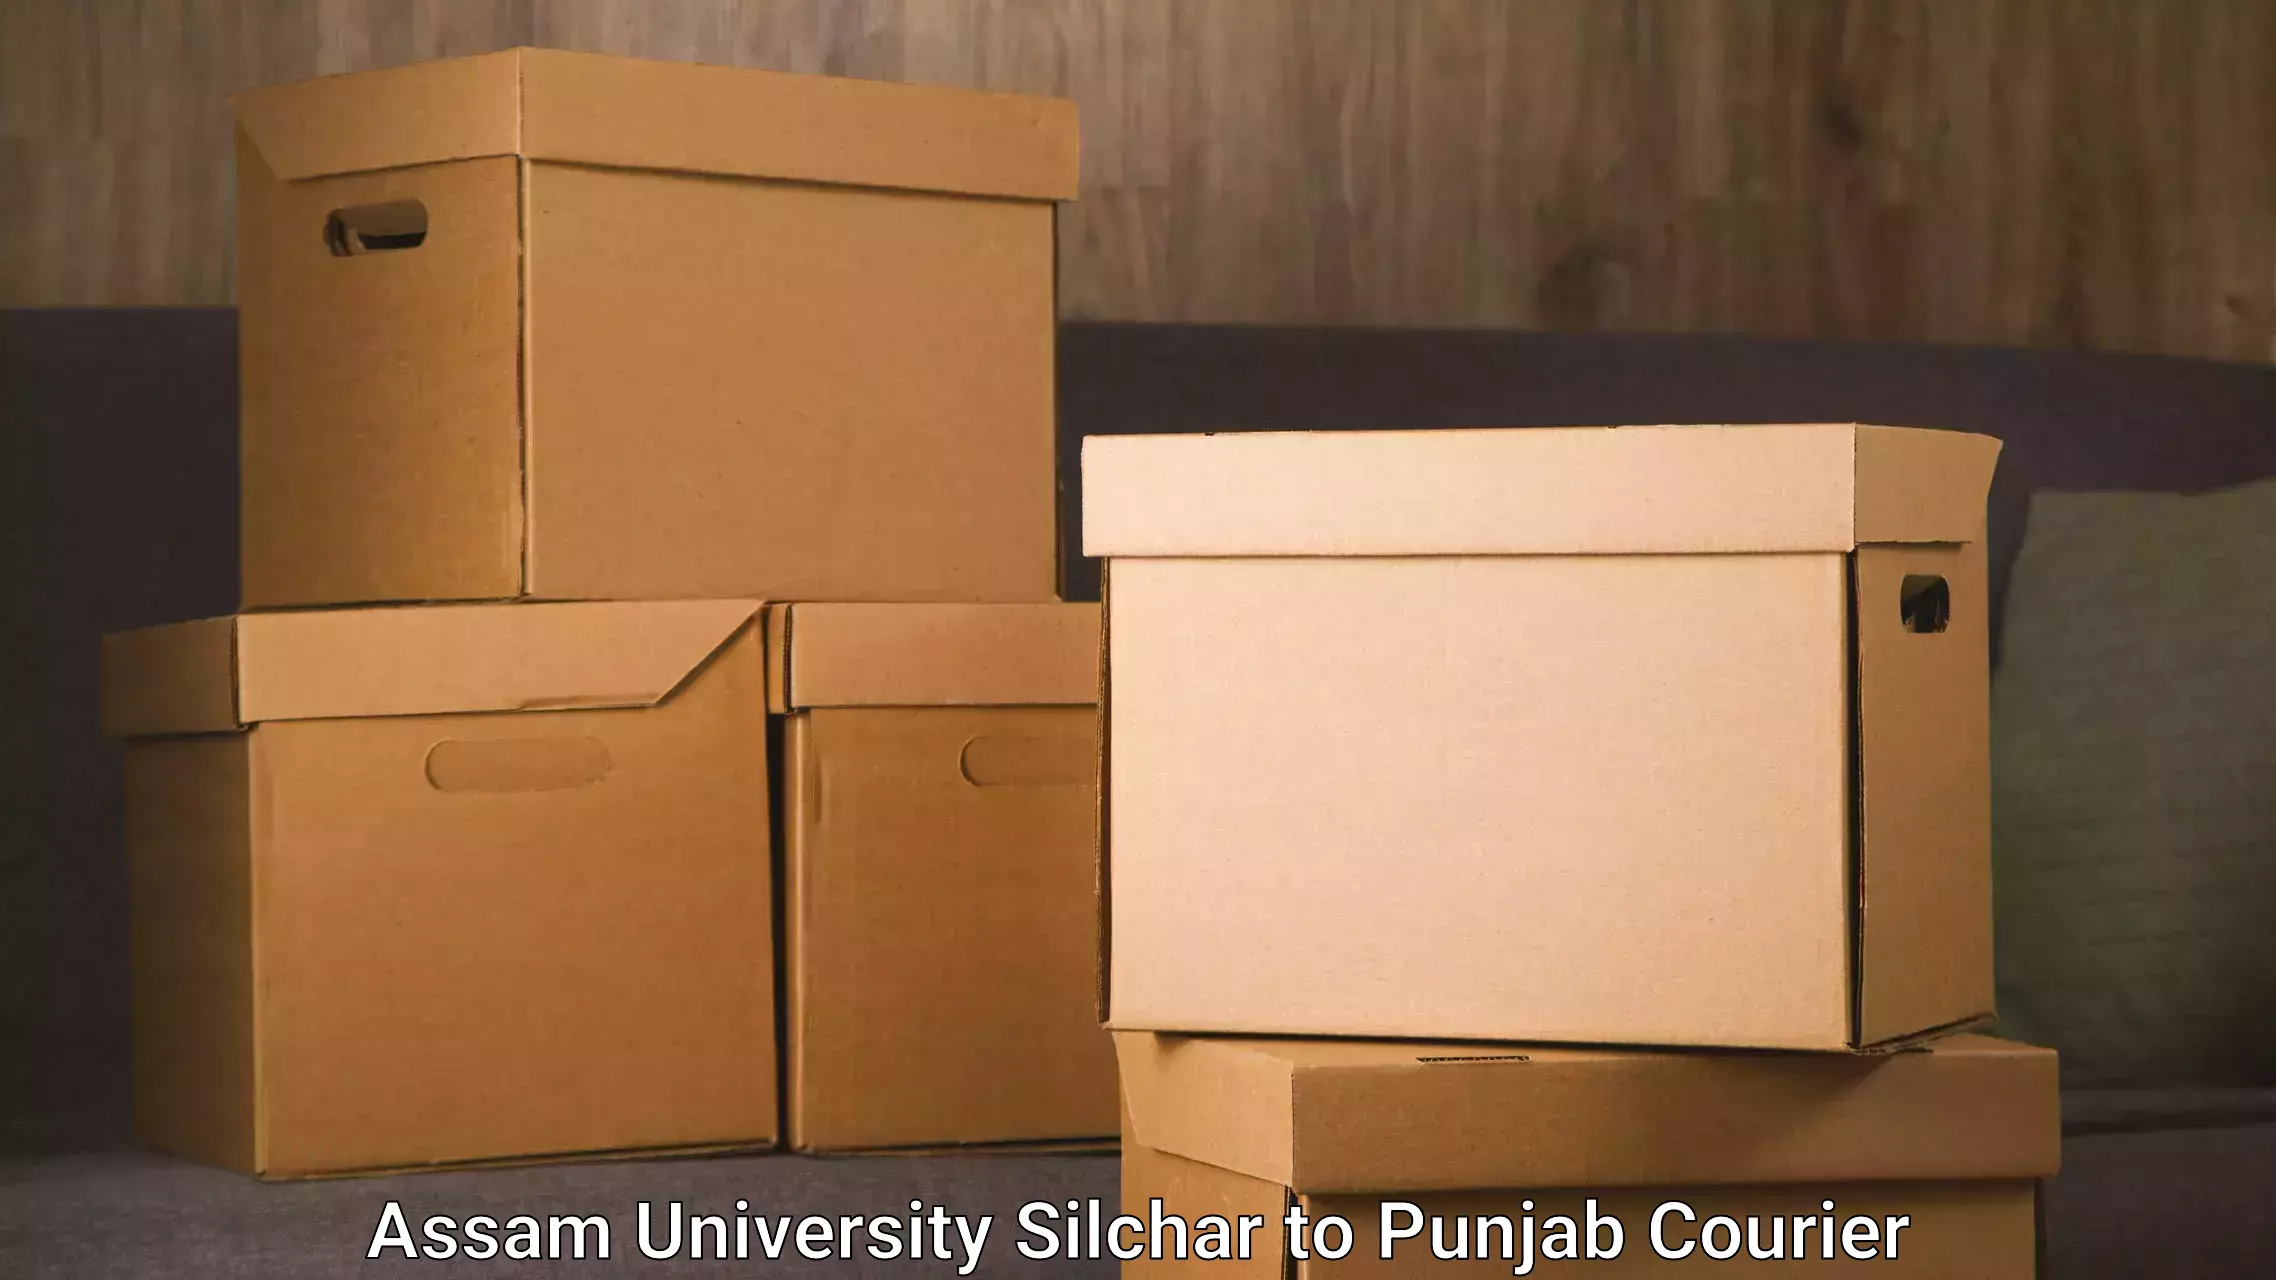 Fast-track shipping solutions Assam University Silchar to Goindwal Sahib